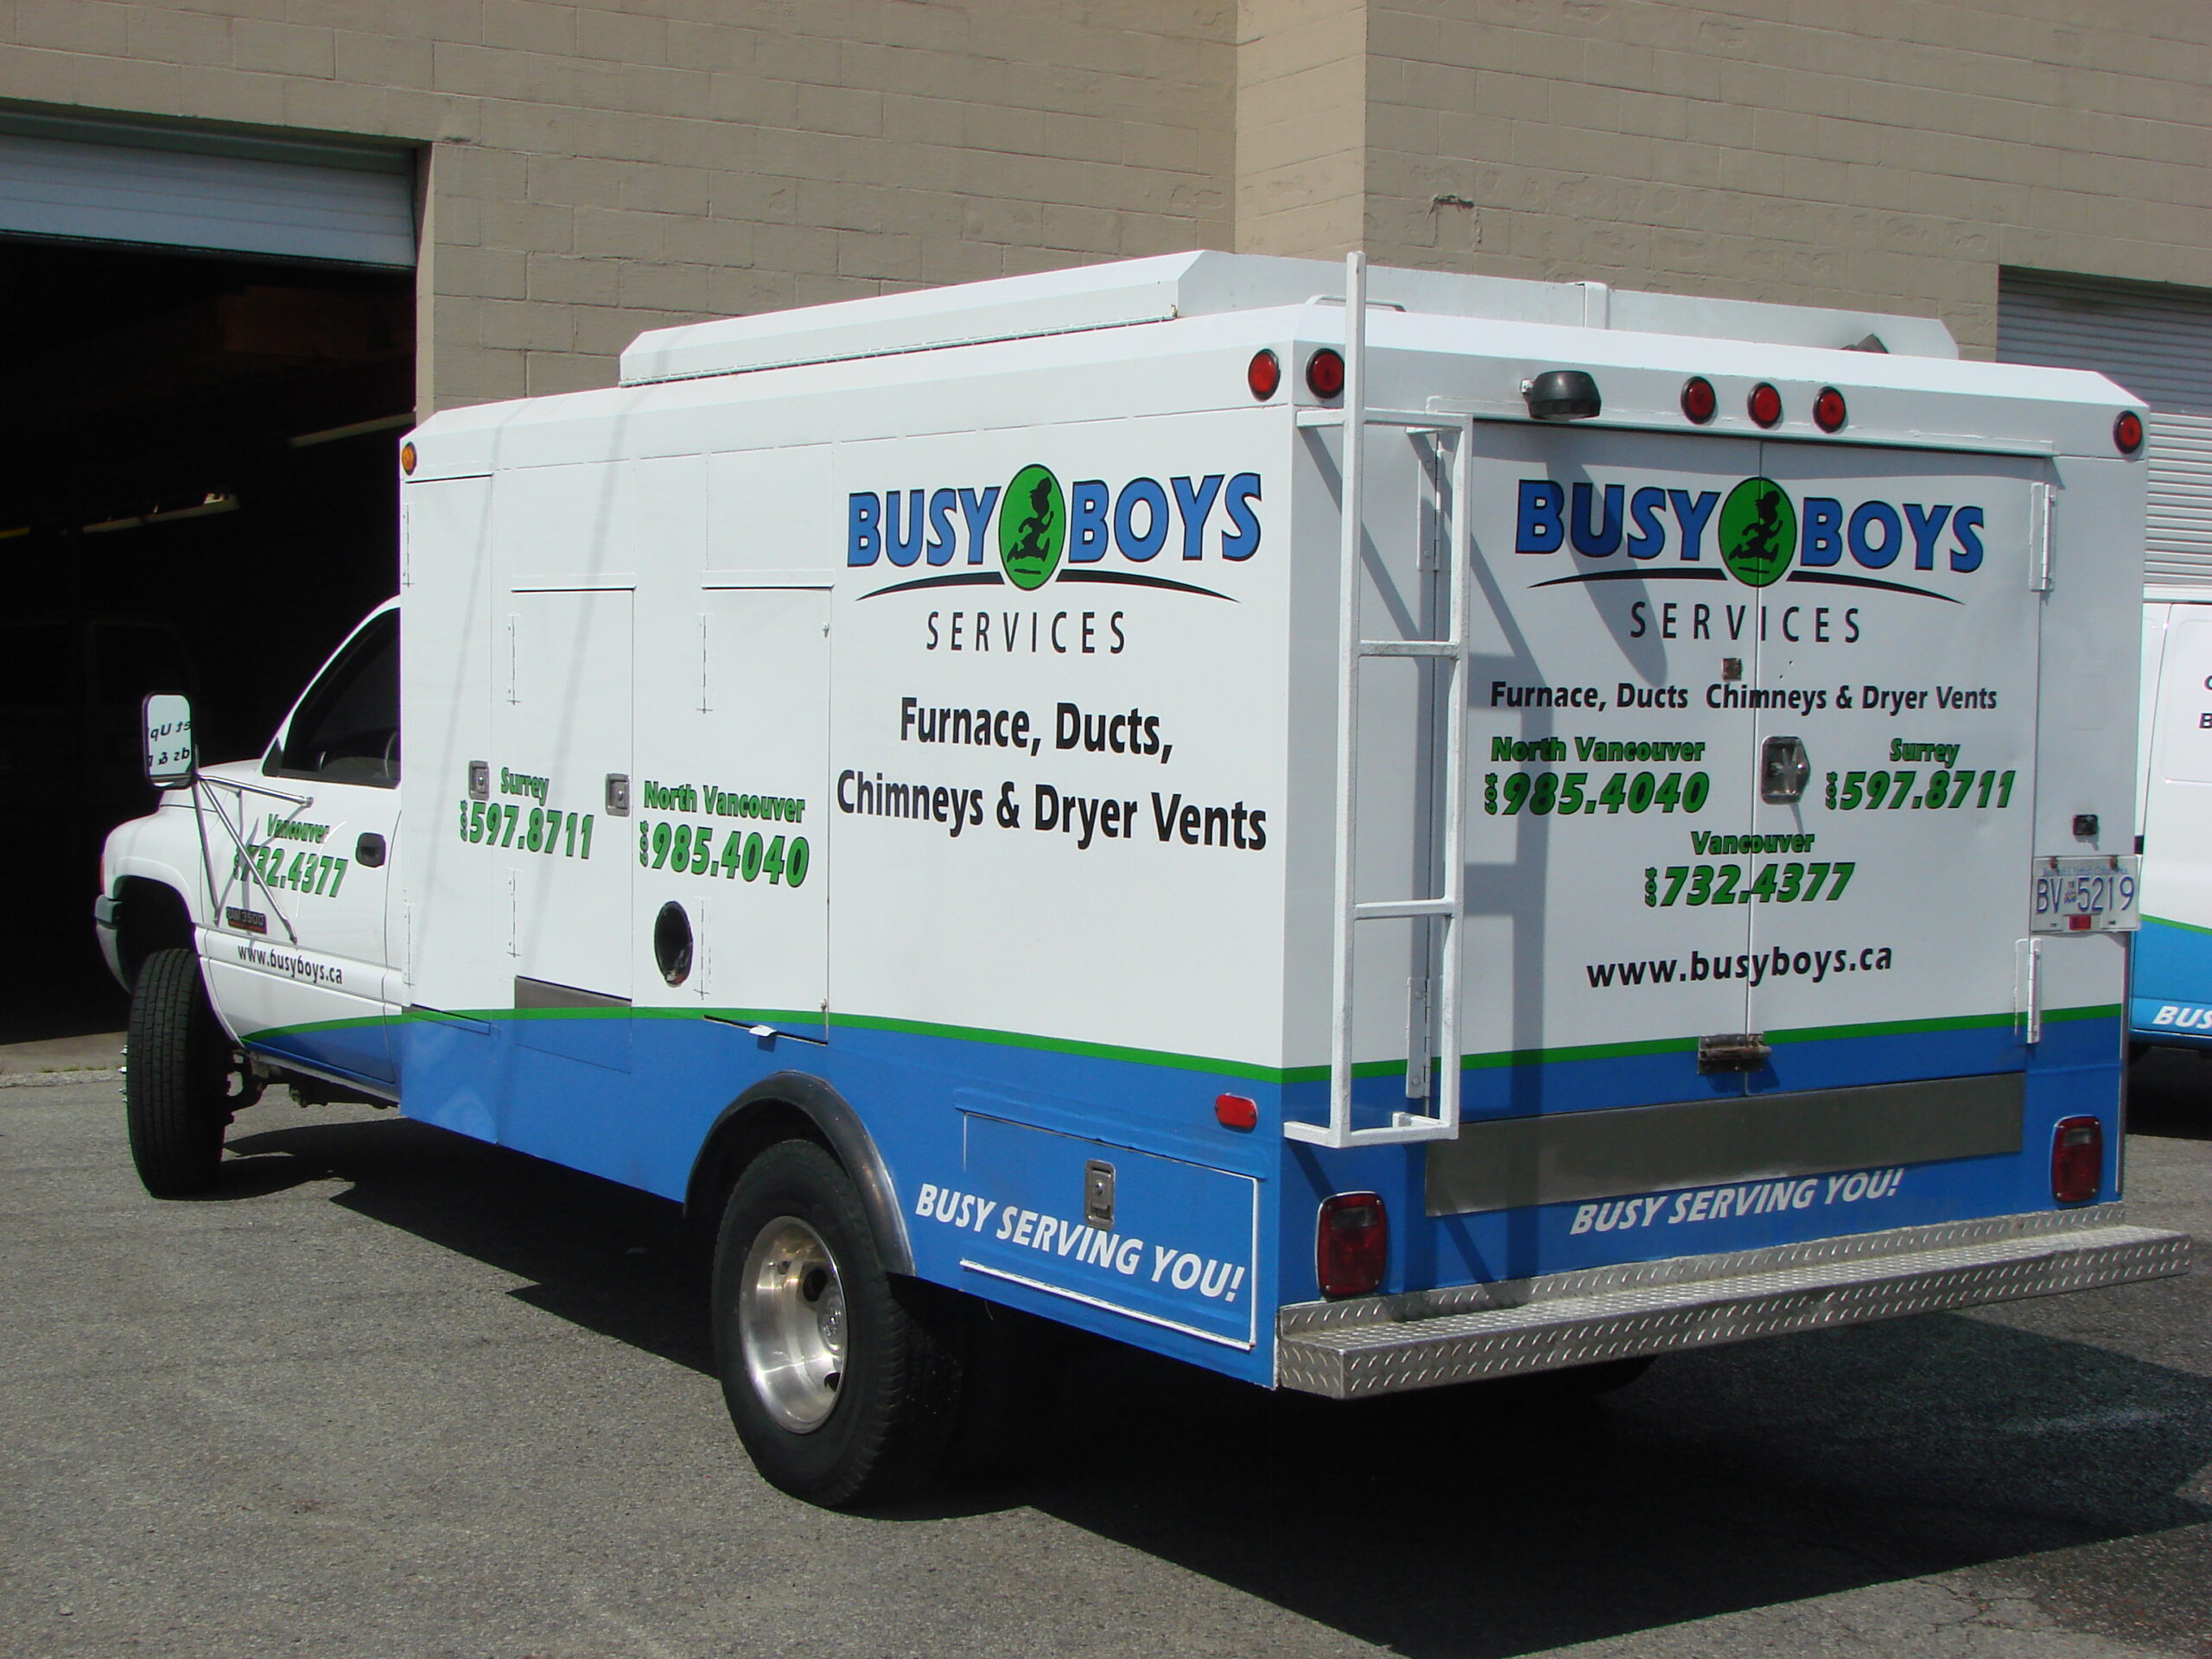 Furnace & Duct Cleaning, Chimney, Dryer Vent & Carpet Cleaning Service